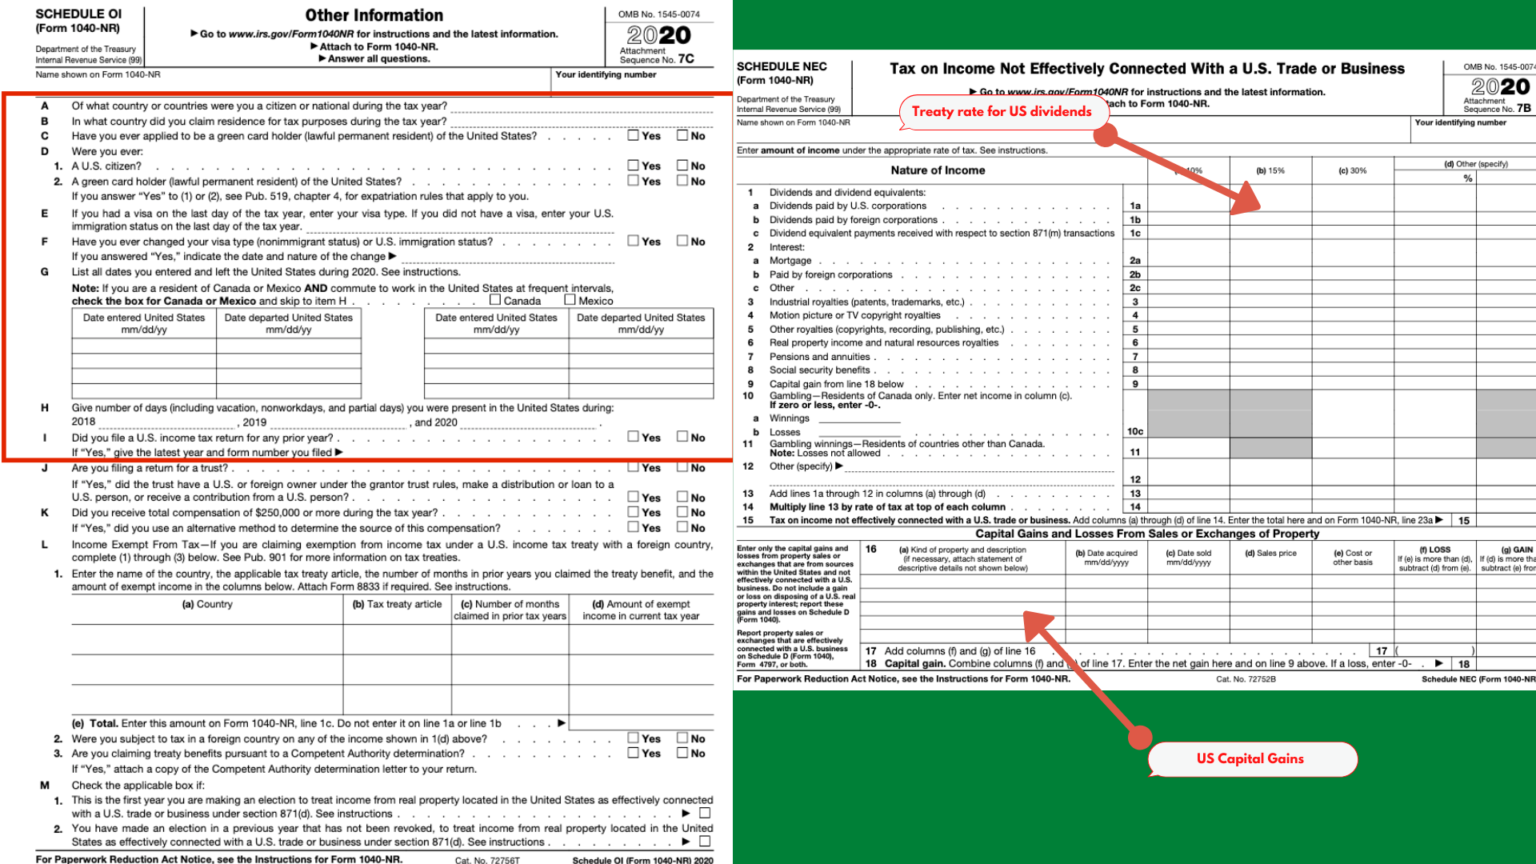 Filing a NonResident Tax Return in the US Form 1040NR CLOUD EXPAT TAX